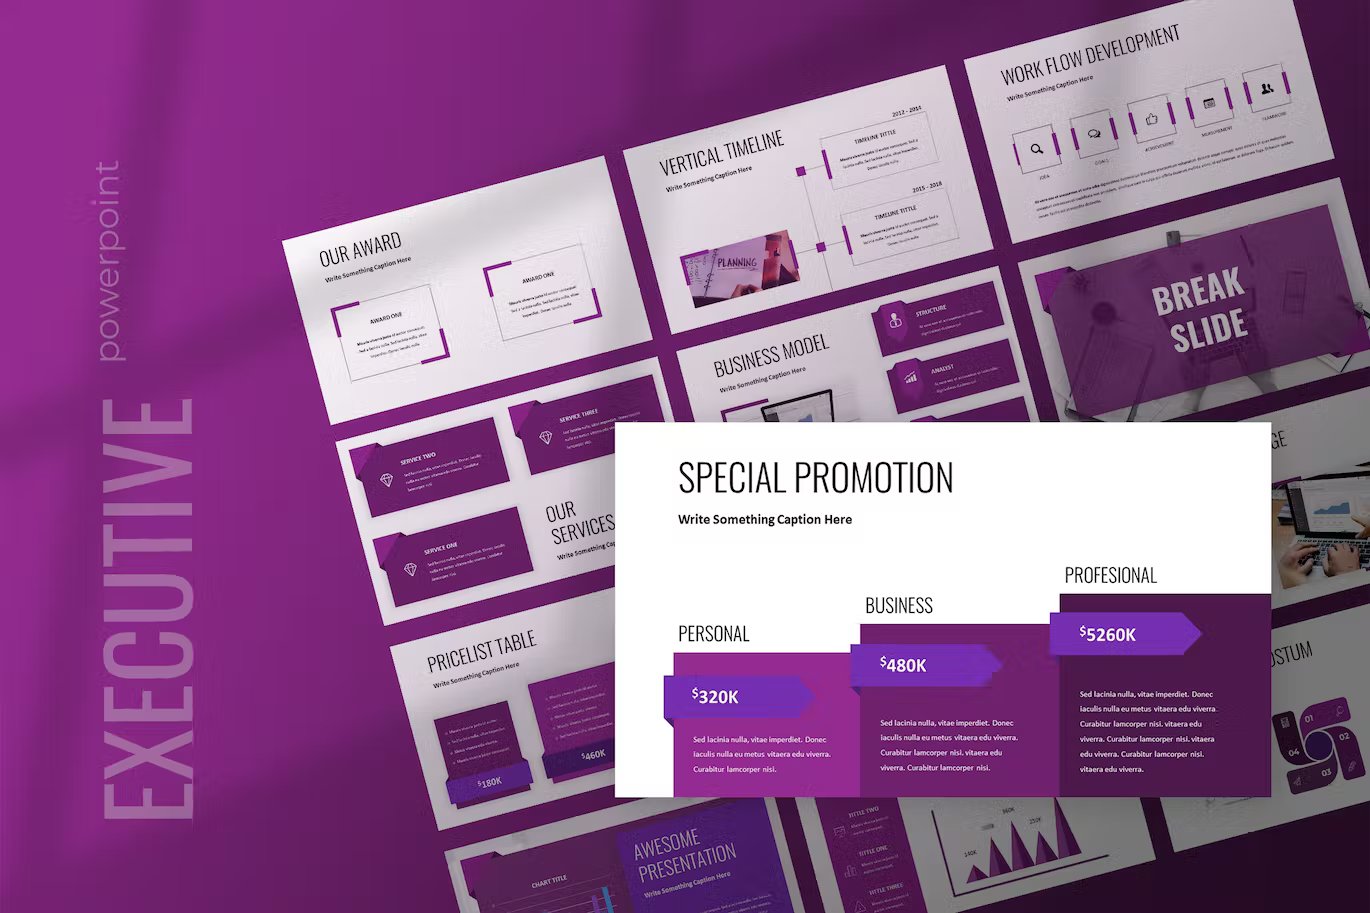 Lavender lettering "Executive powerpoint" and executive - powerpoint presentation for business templates on a purple background.